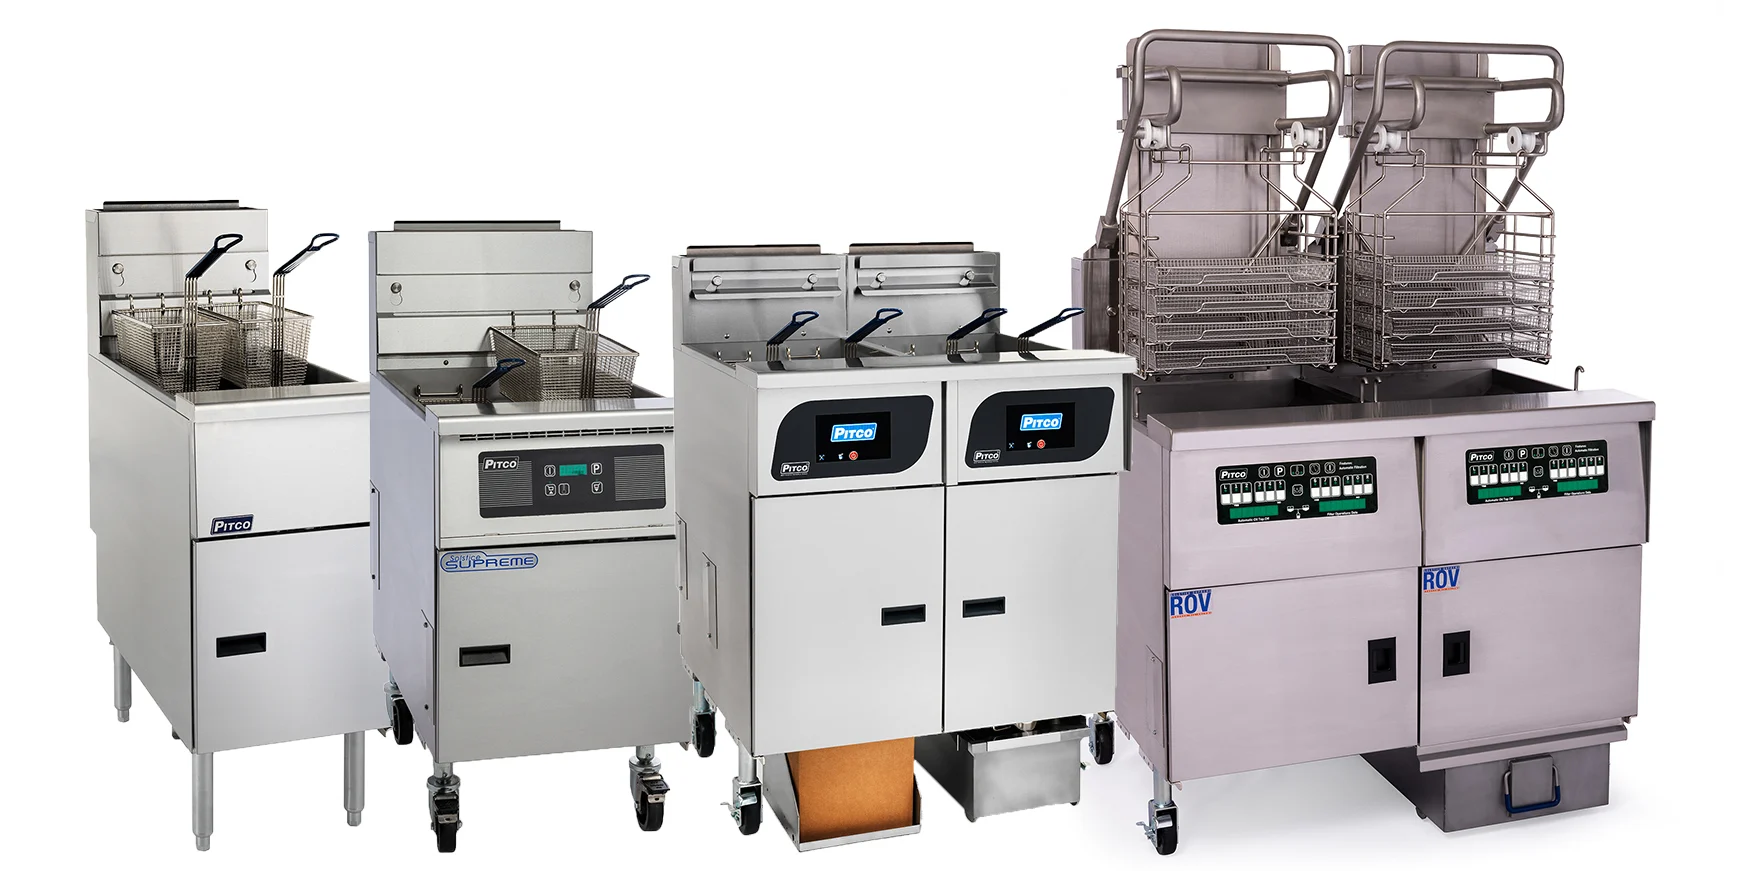 Pitco  The World's Most Reliable Commercial Fryer Company